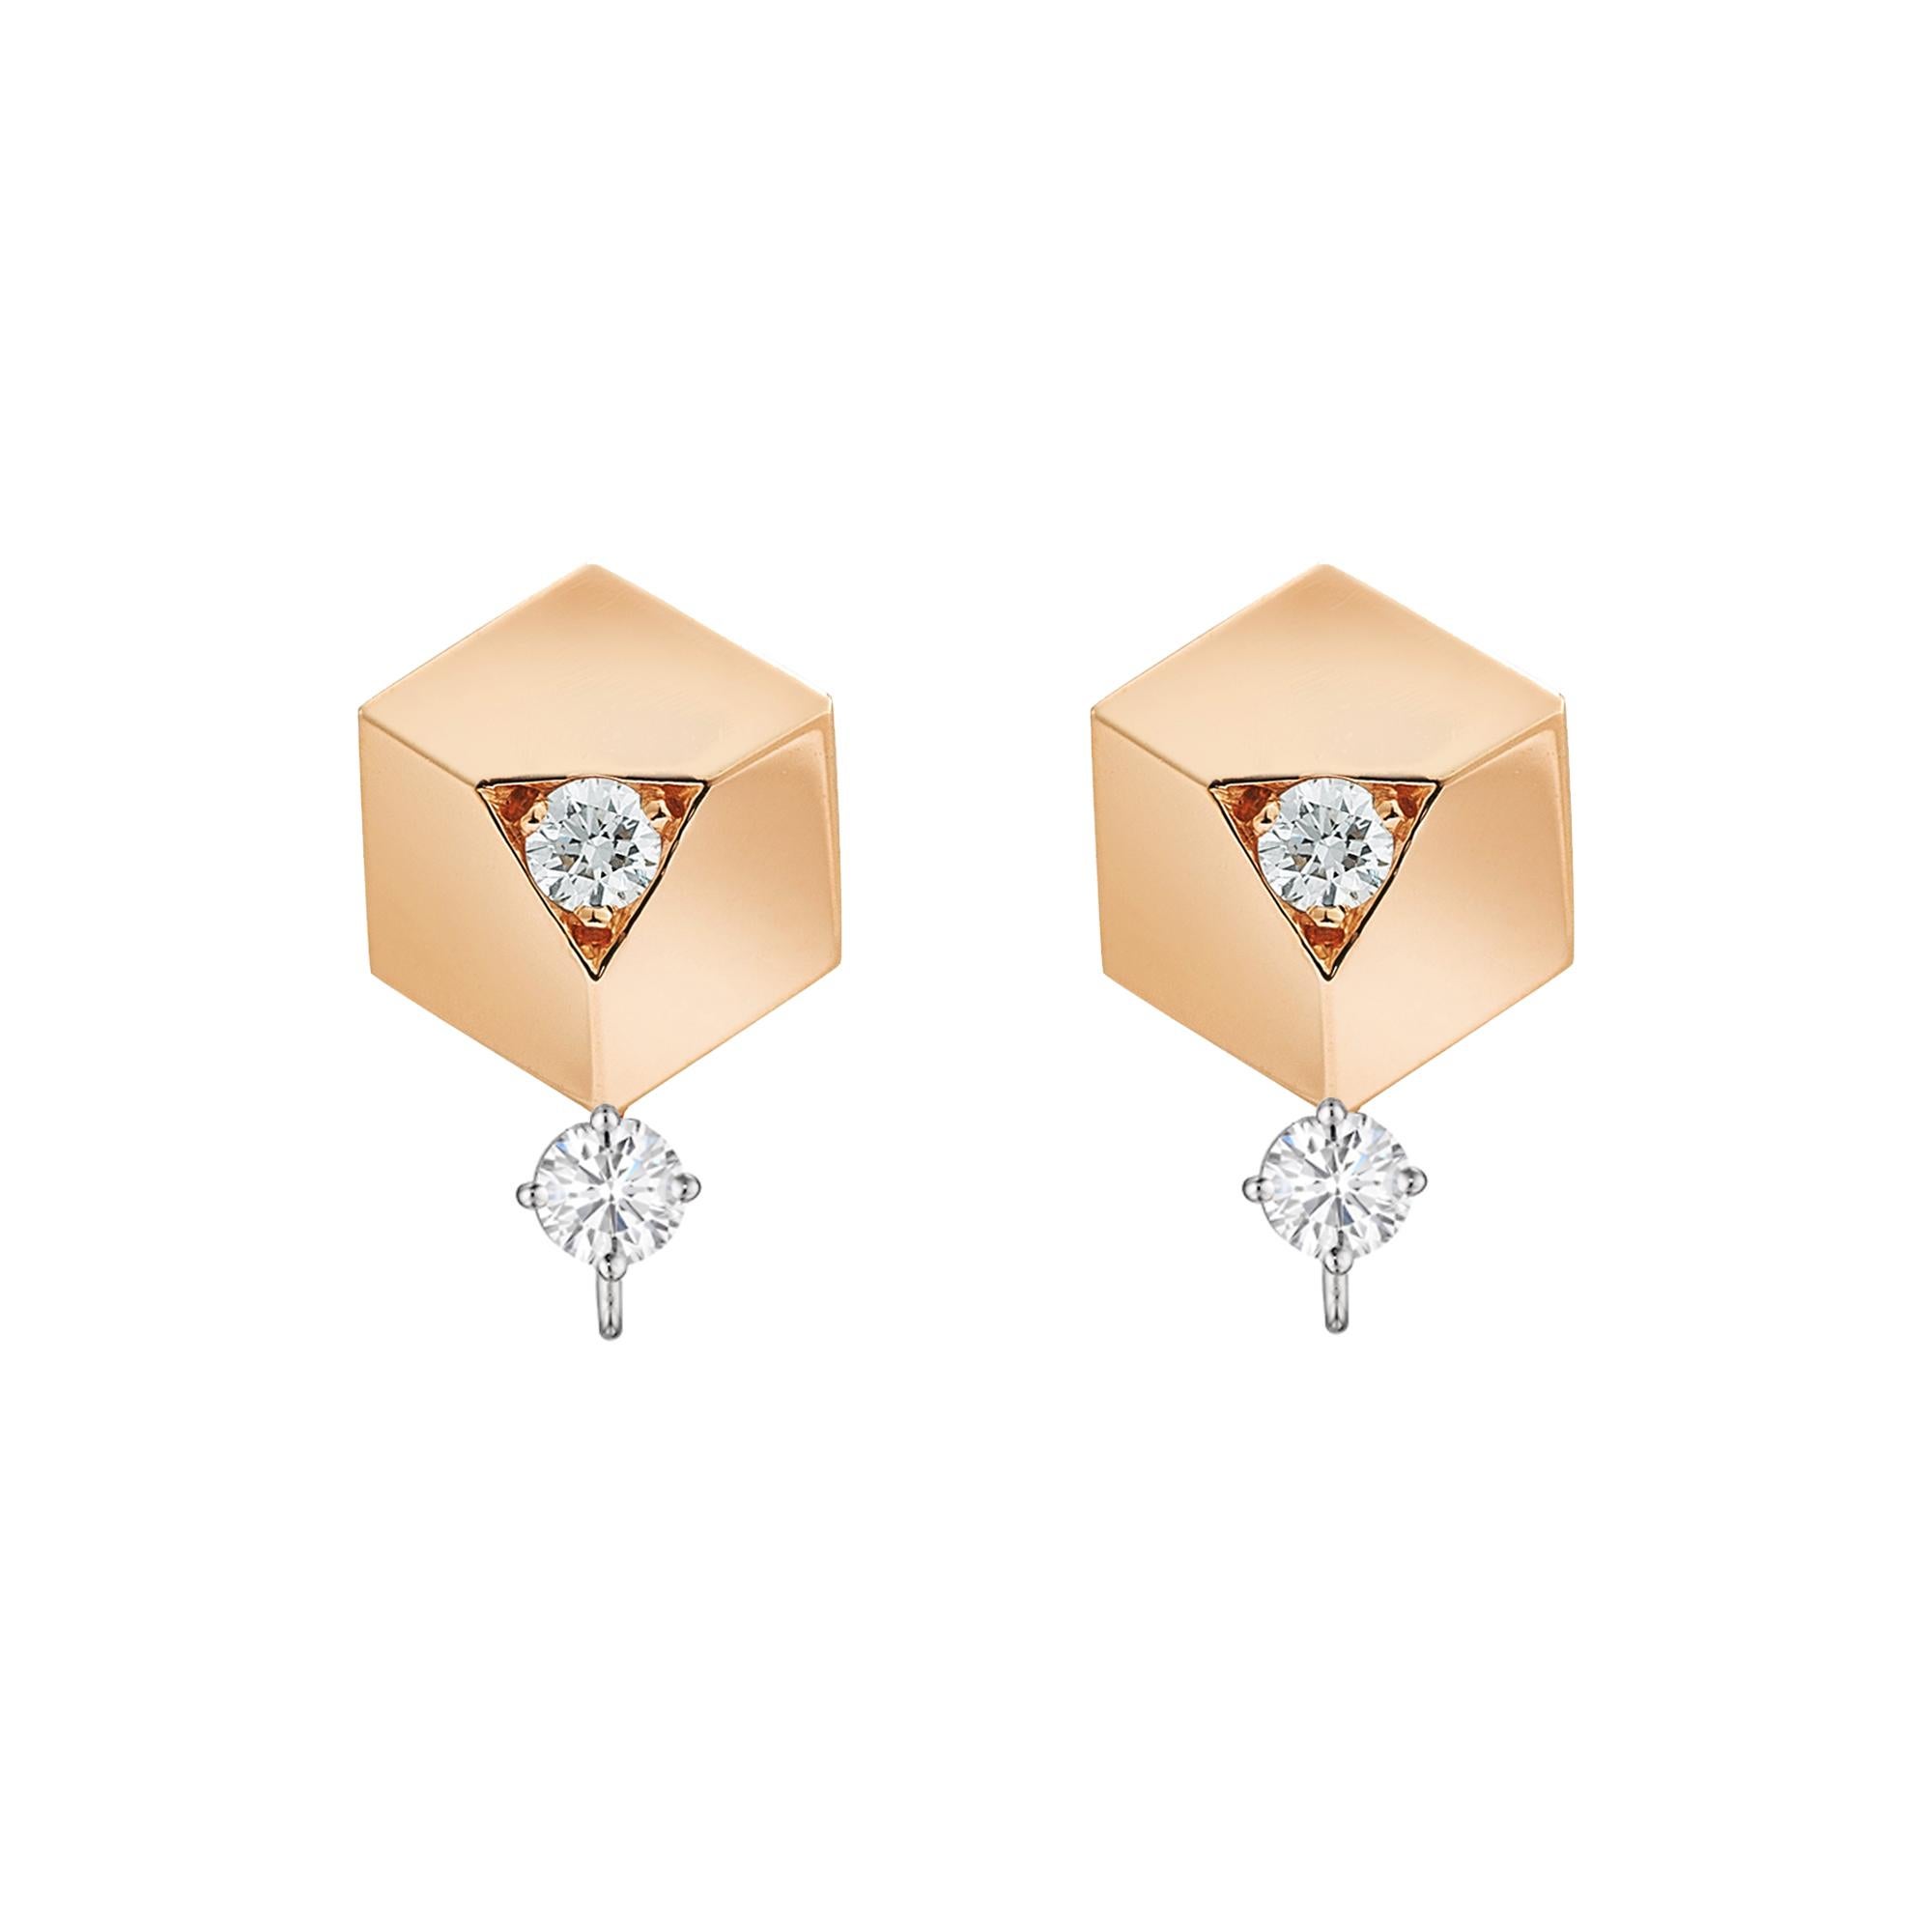 From the award winning Brillante collection, 18k rose gold Brillante top earrings with round, brilliant diamonds paired with one of a kind pear-shaped golden sapphire pendants set in 18k rose gold. Featuring a detachable pendant to allow for two,